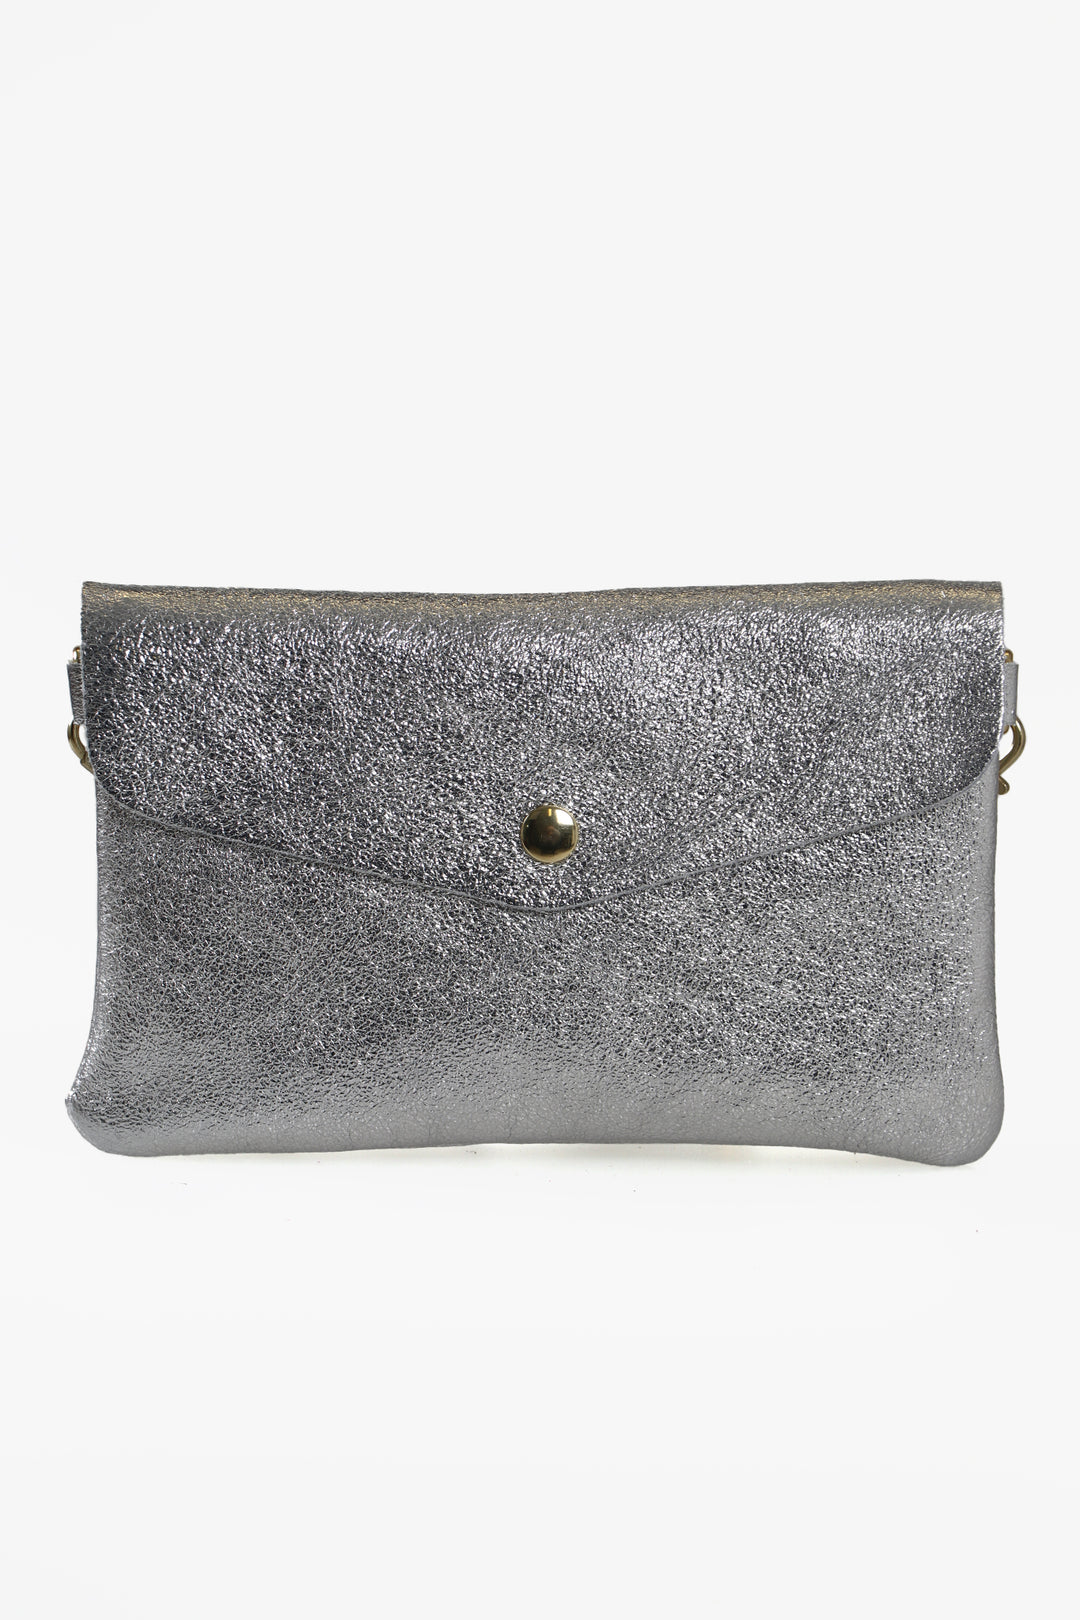 Silver Large Genuine Italian Leather Envelope Clutch